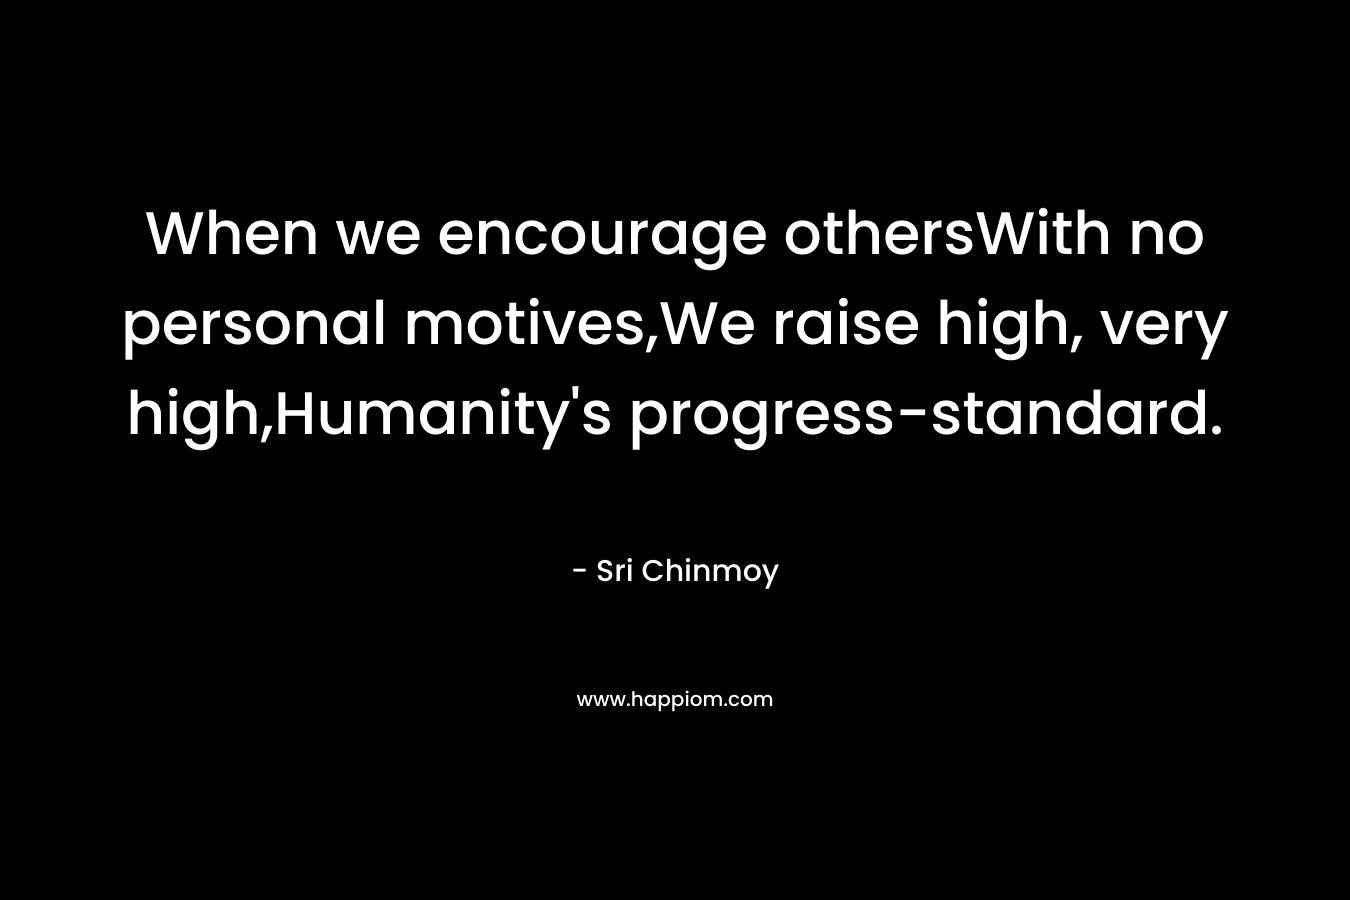 When we encourage othersWith no personal motives,We raise high, very high,Humanity’s progress-standard. – Sri Chinmoy